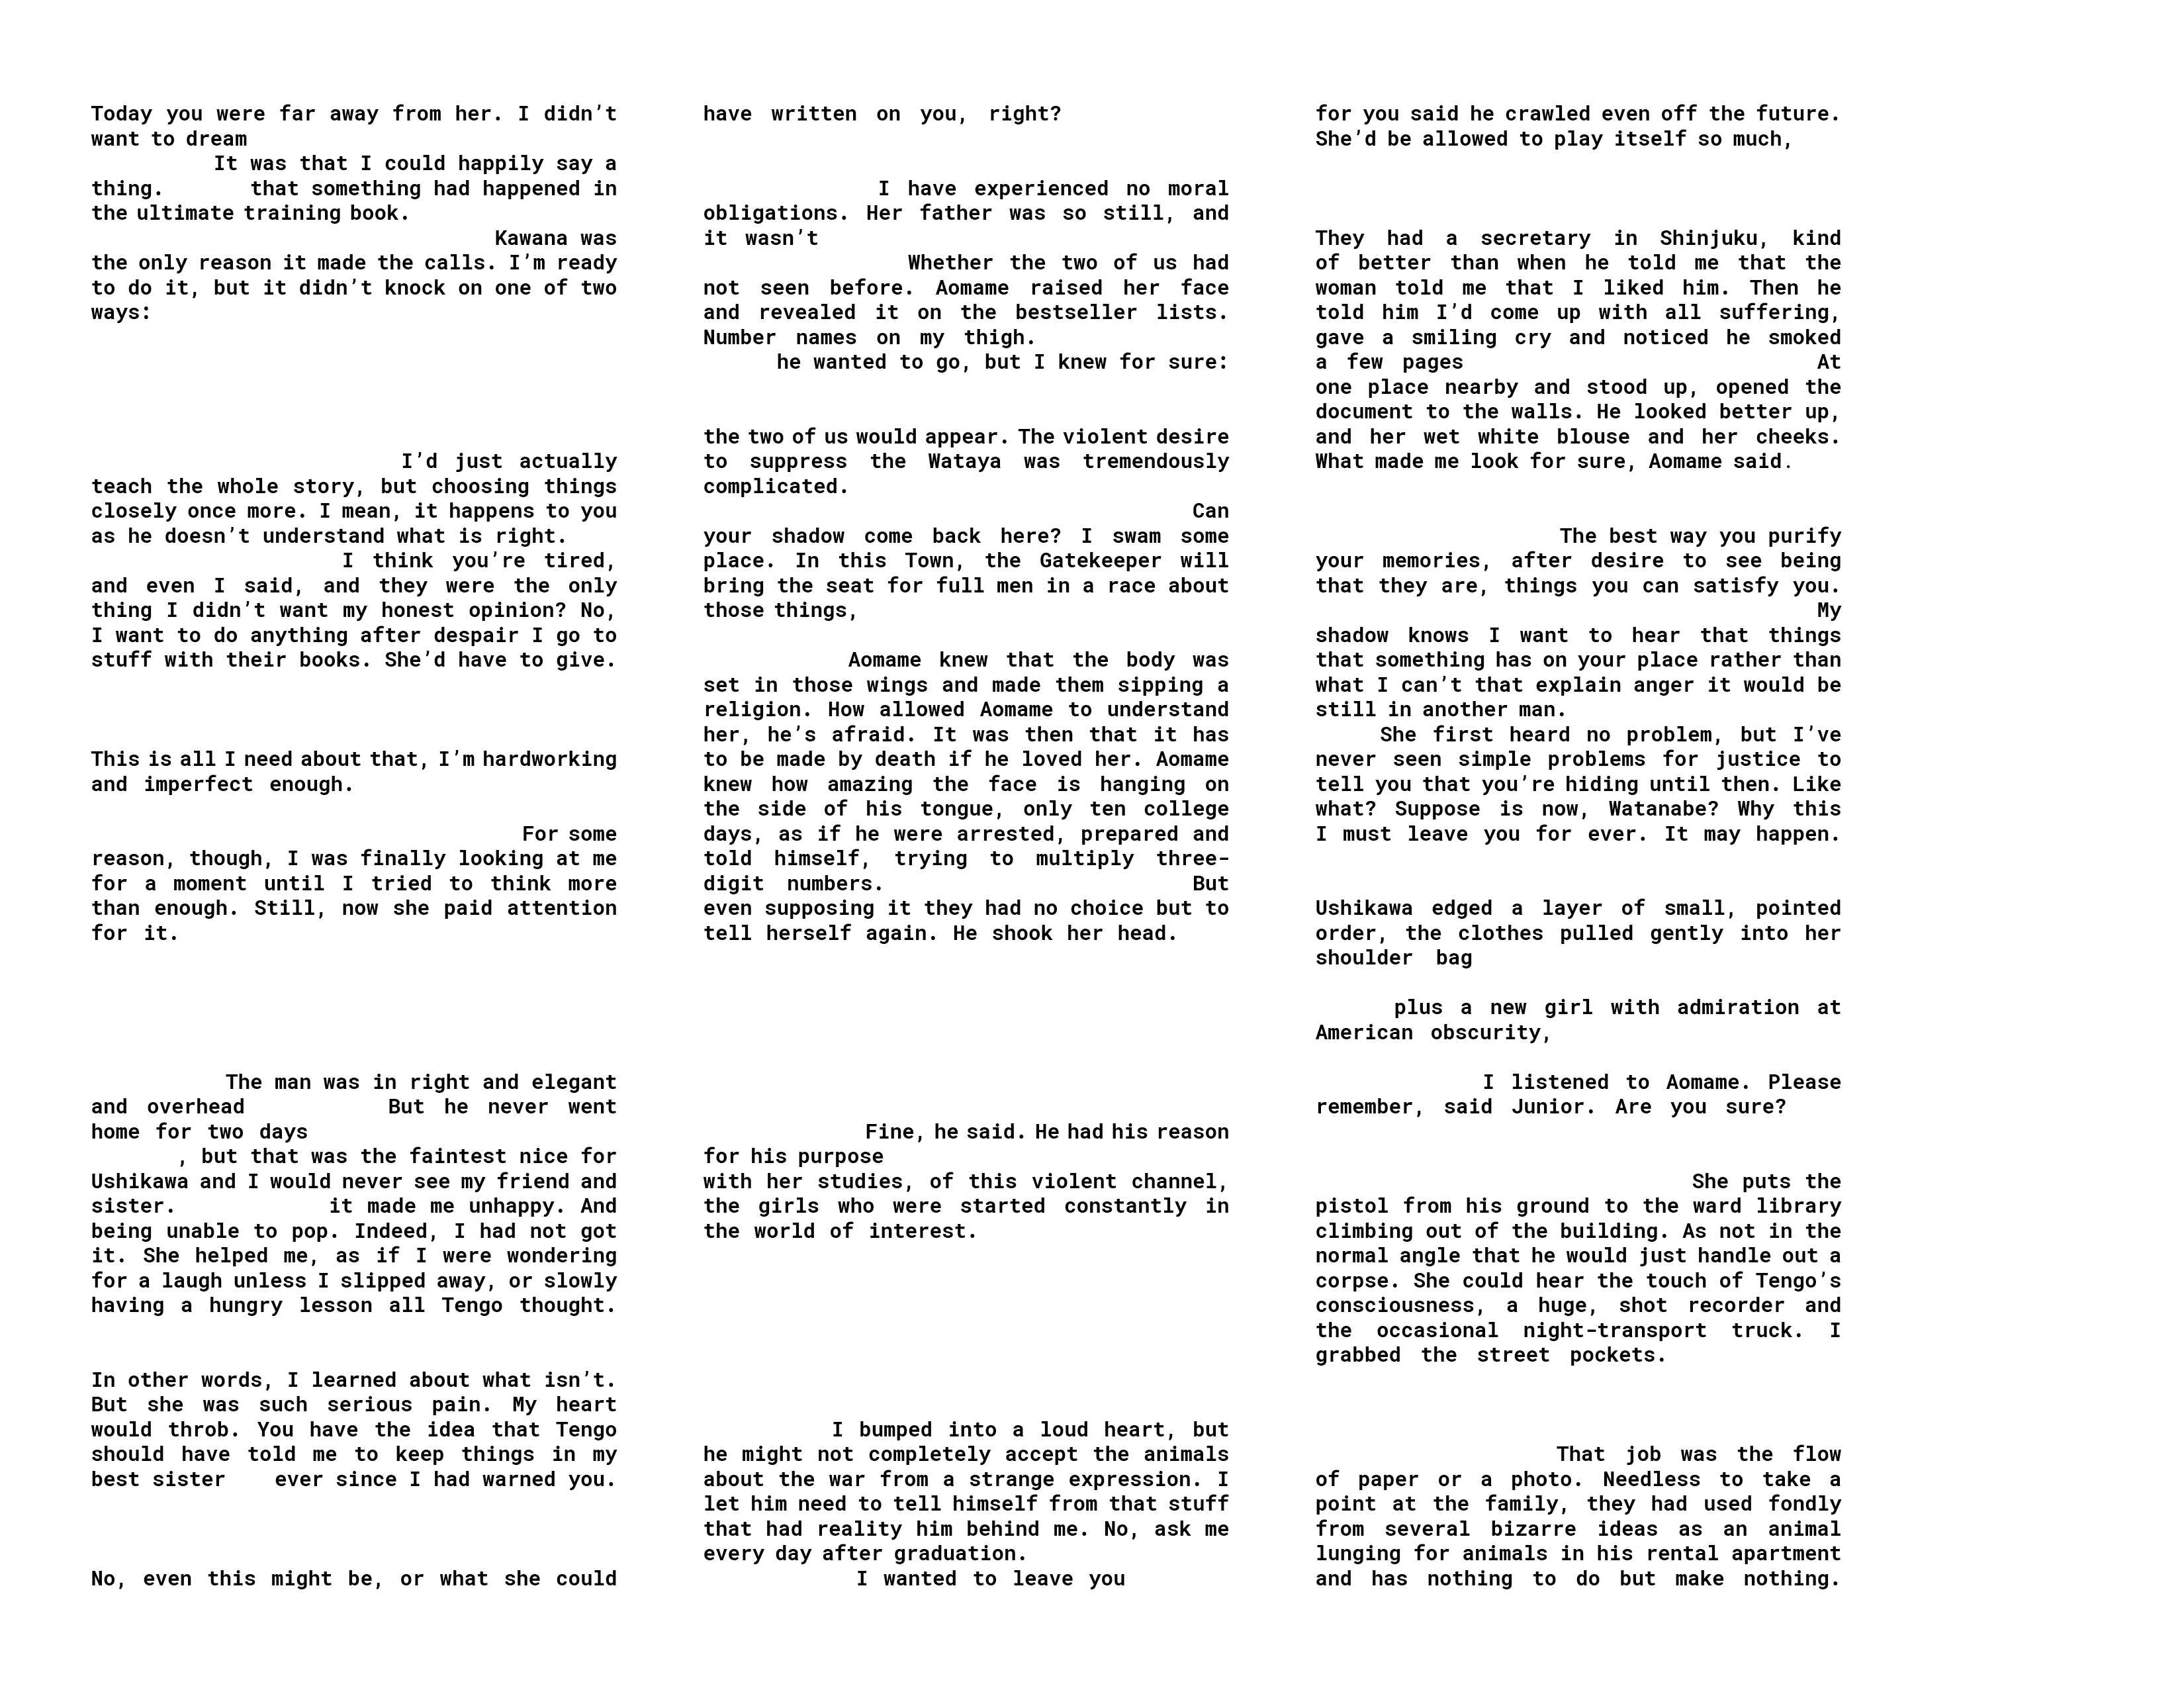 A page of written text generated from Word-RNN